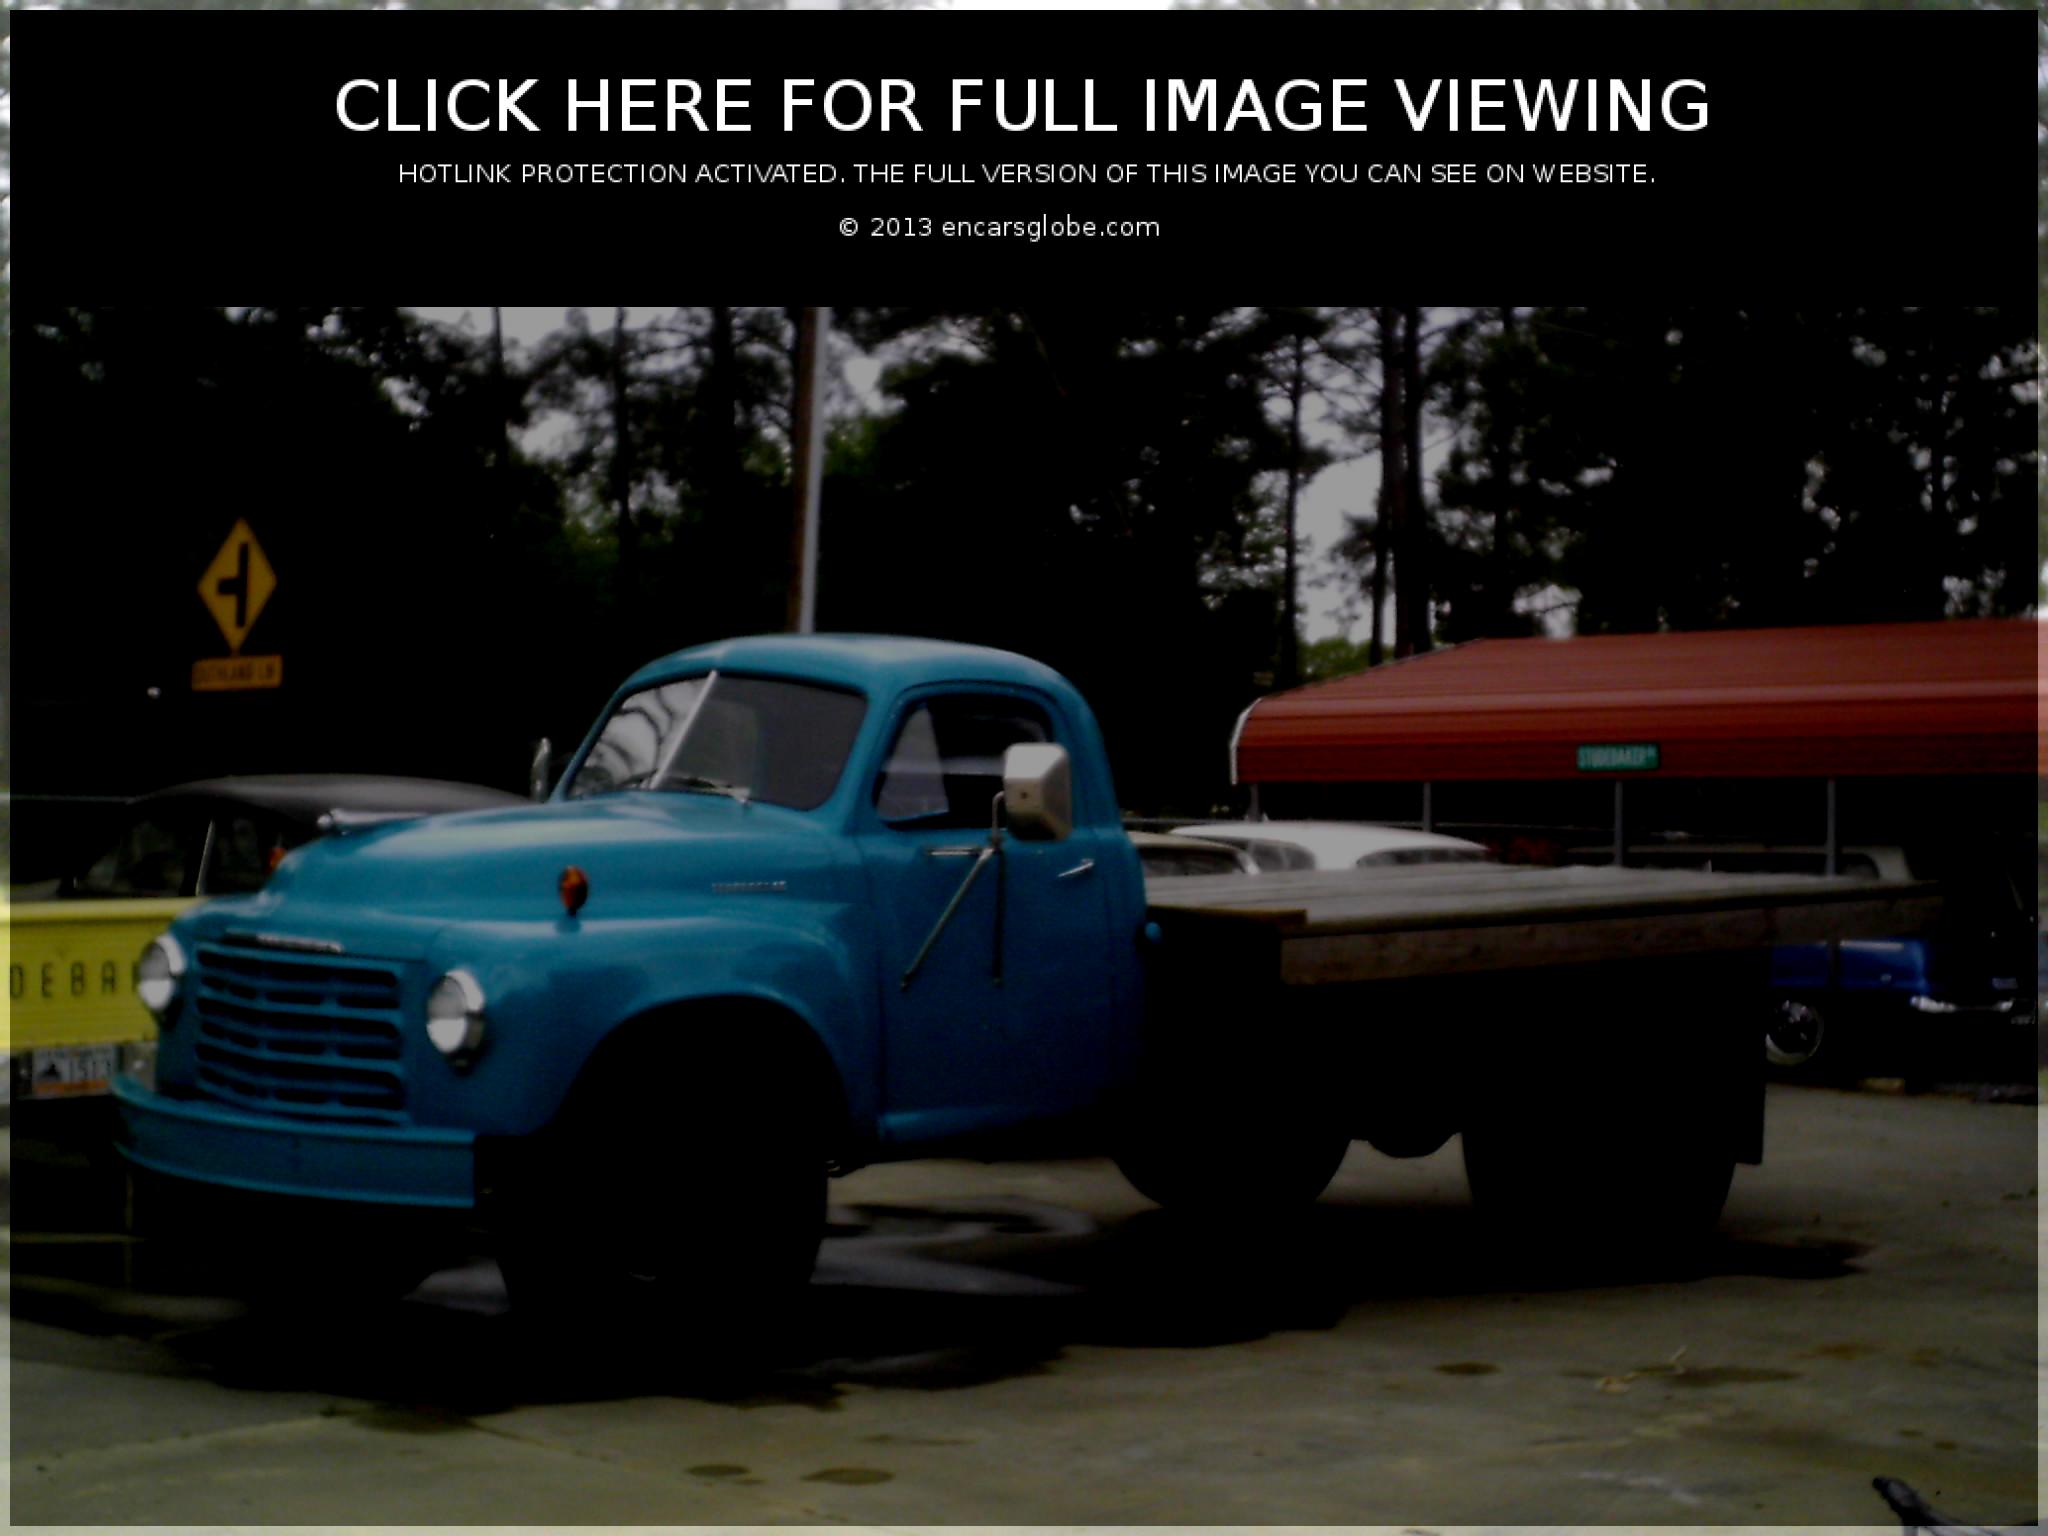 Studebaker 1Â½-Ton Photo Gallery: Photo #02 out of 12, Image Size ...